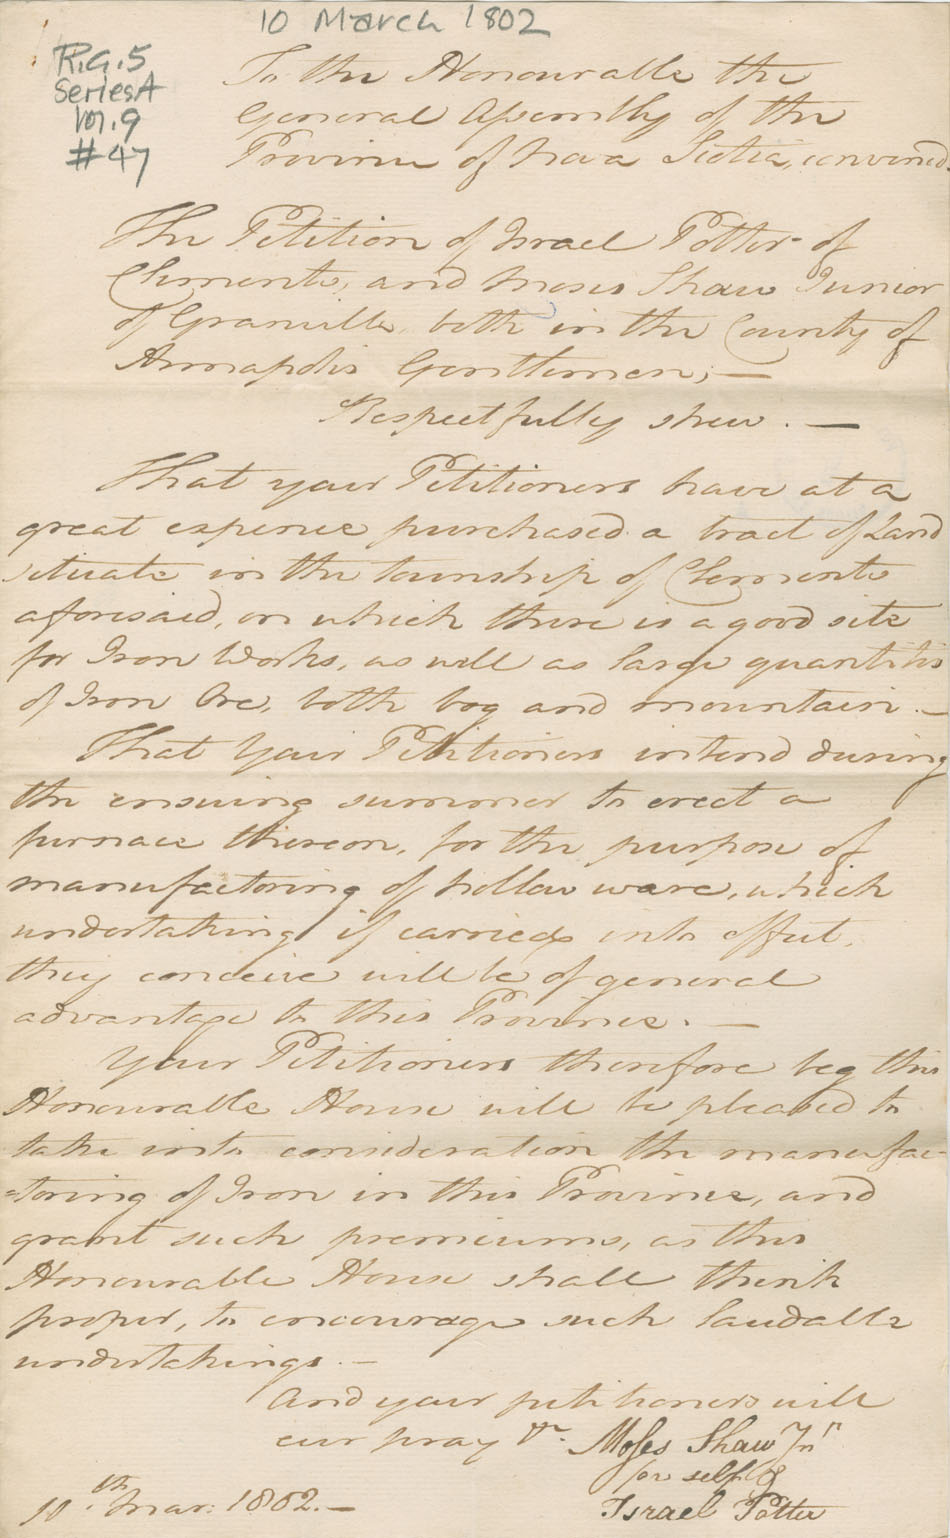 assembly : Petition of Israel Potter of Clements and Moses Shaw, junior, of Granville for money to help build a furnace for the manufacture of iron.